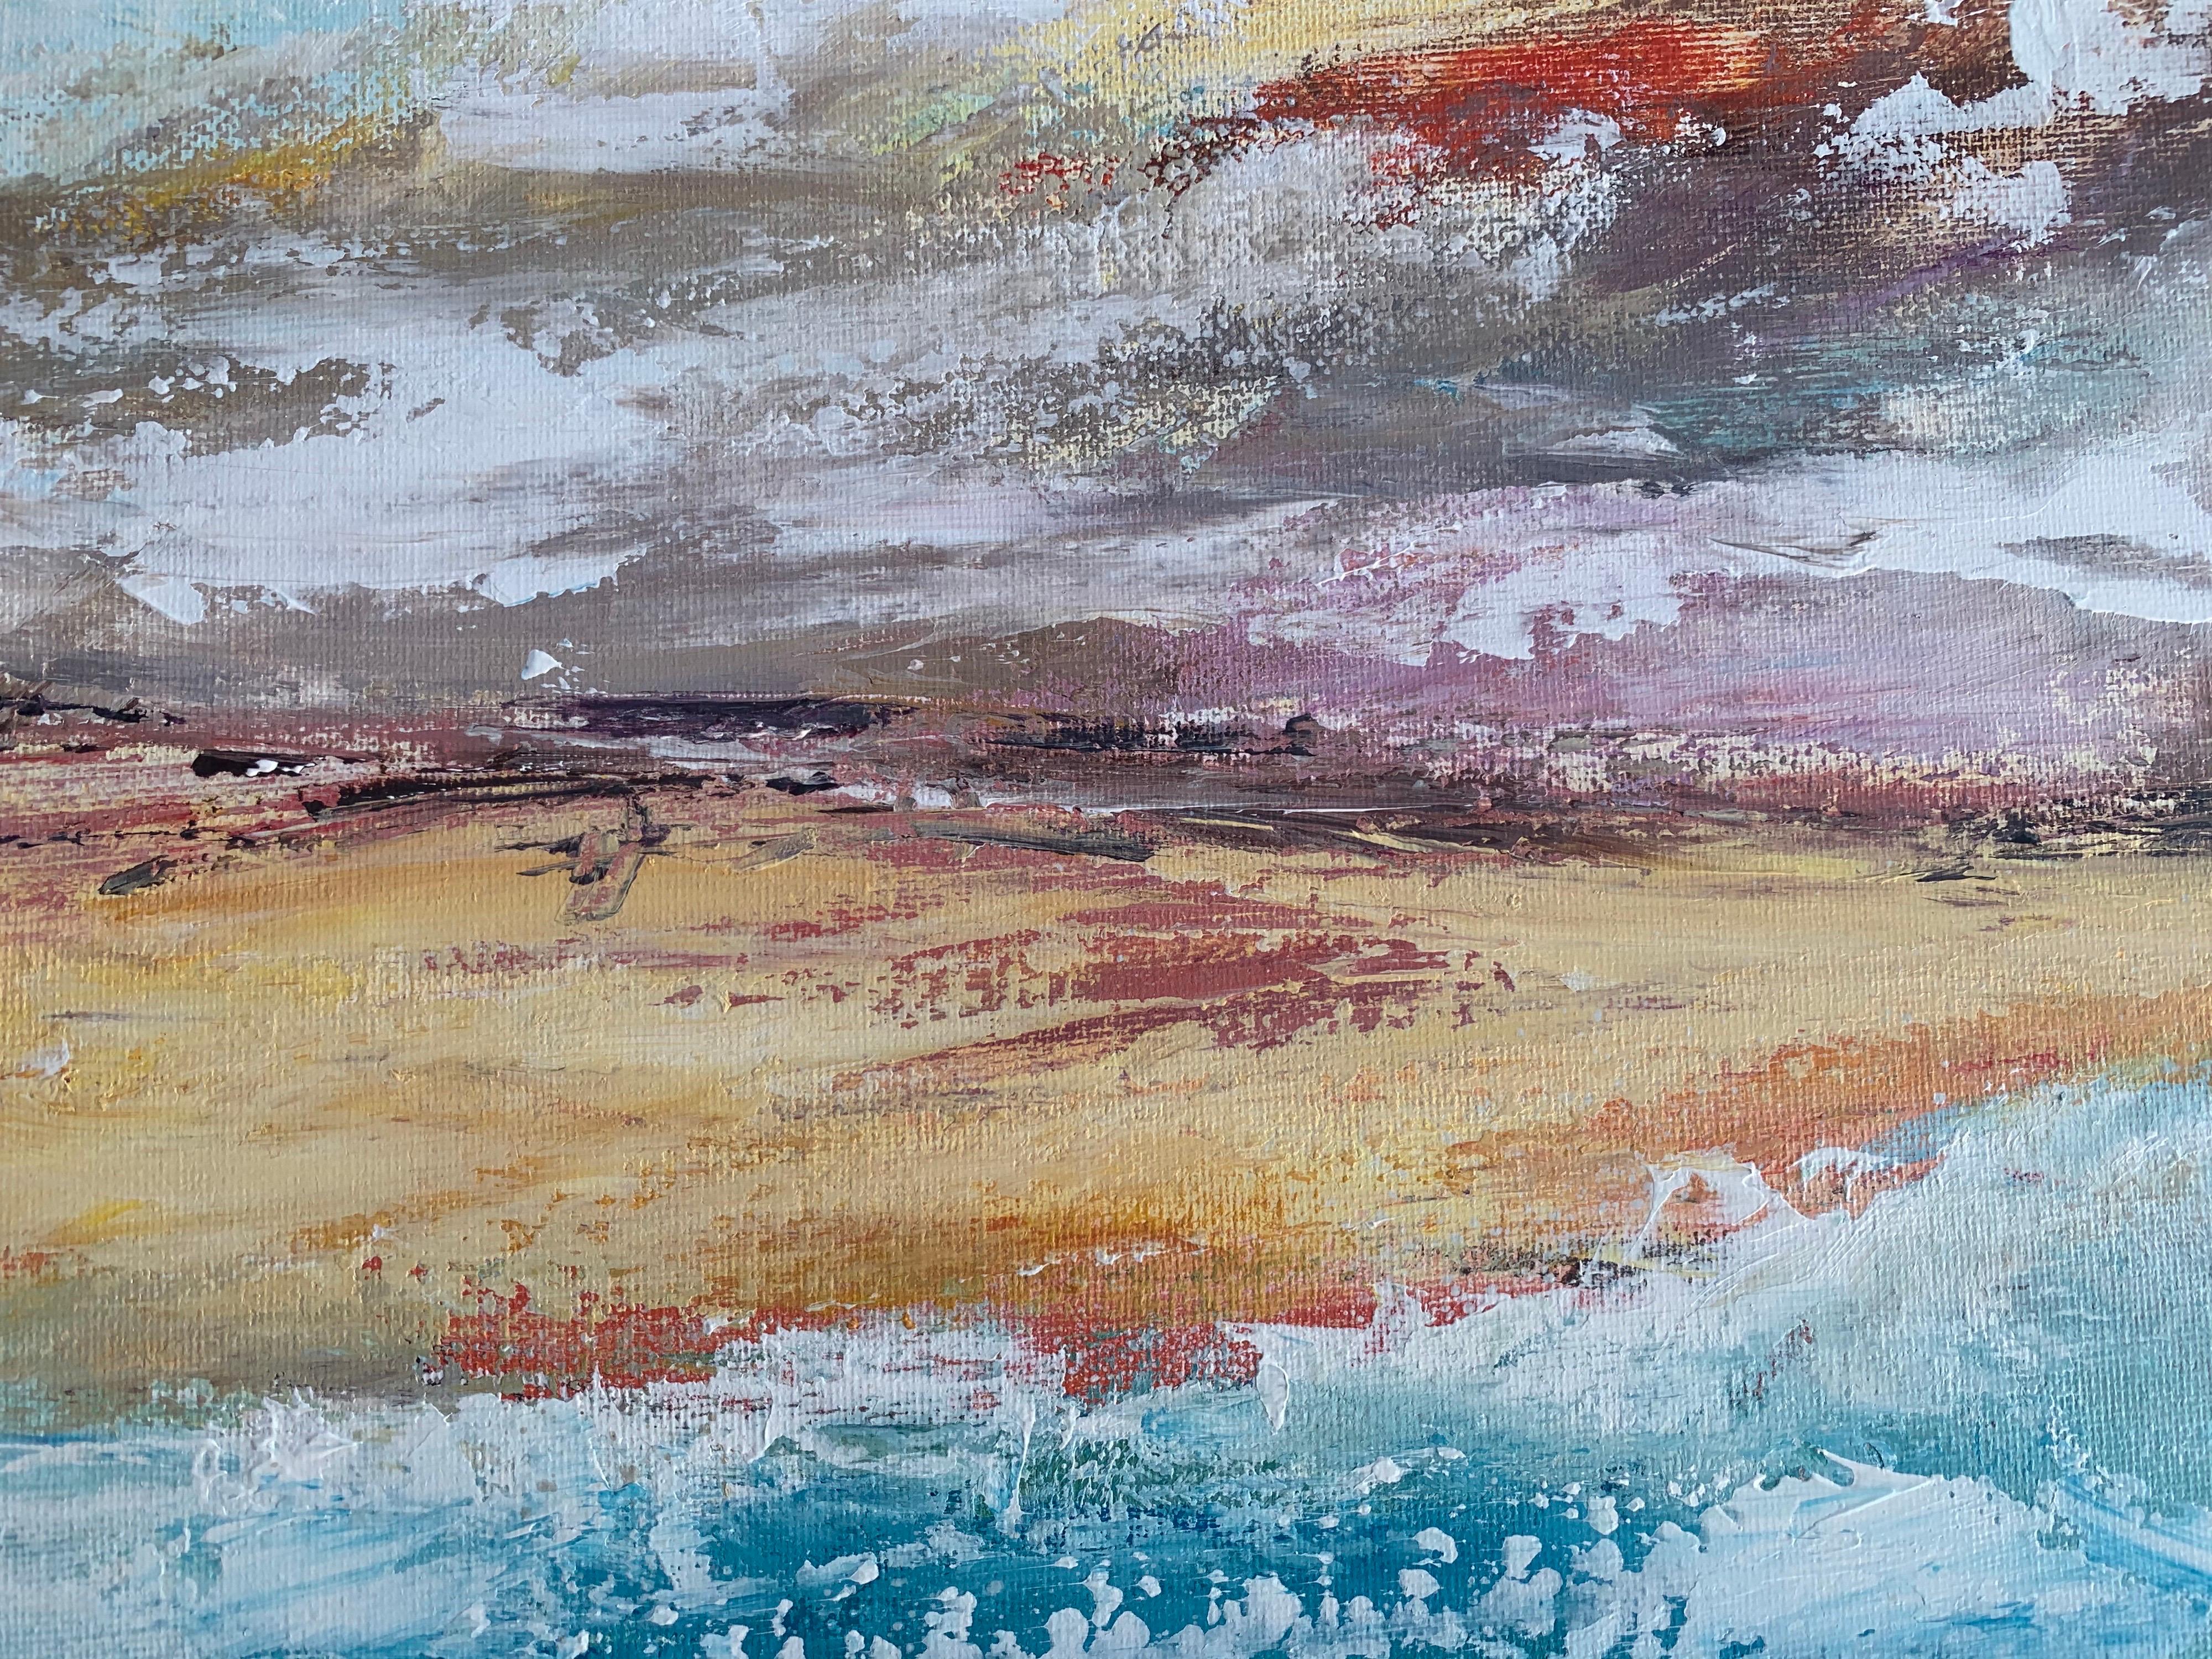 Abstract Landscape Coastal Seascape Painting by Contemporary British Artist 5